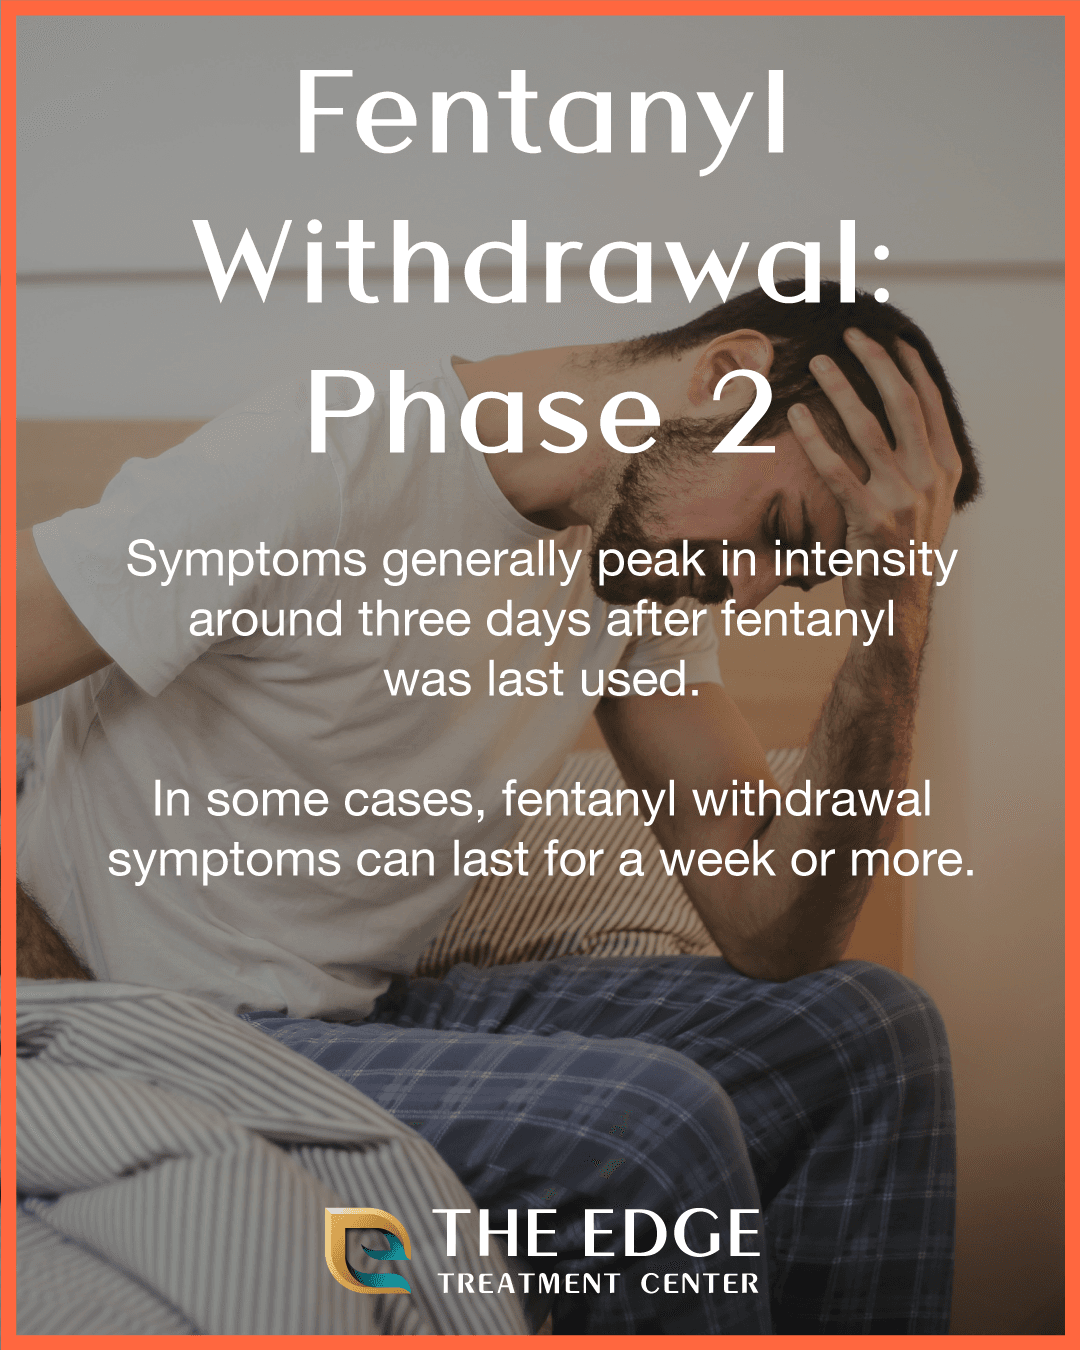 Fentanyl Withdrawal: Phase 2